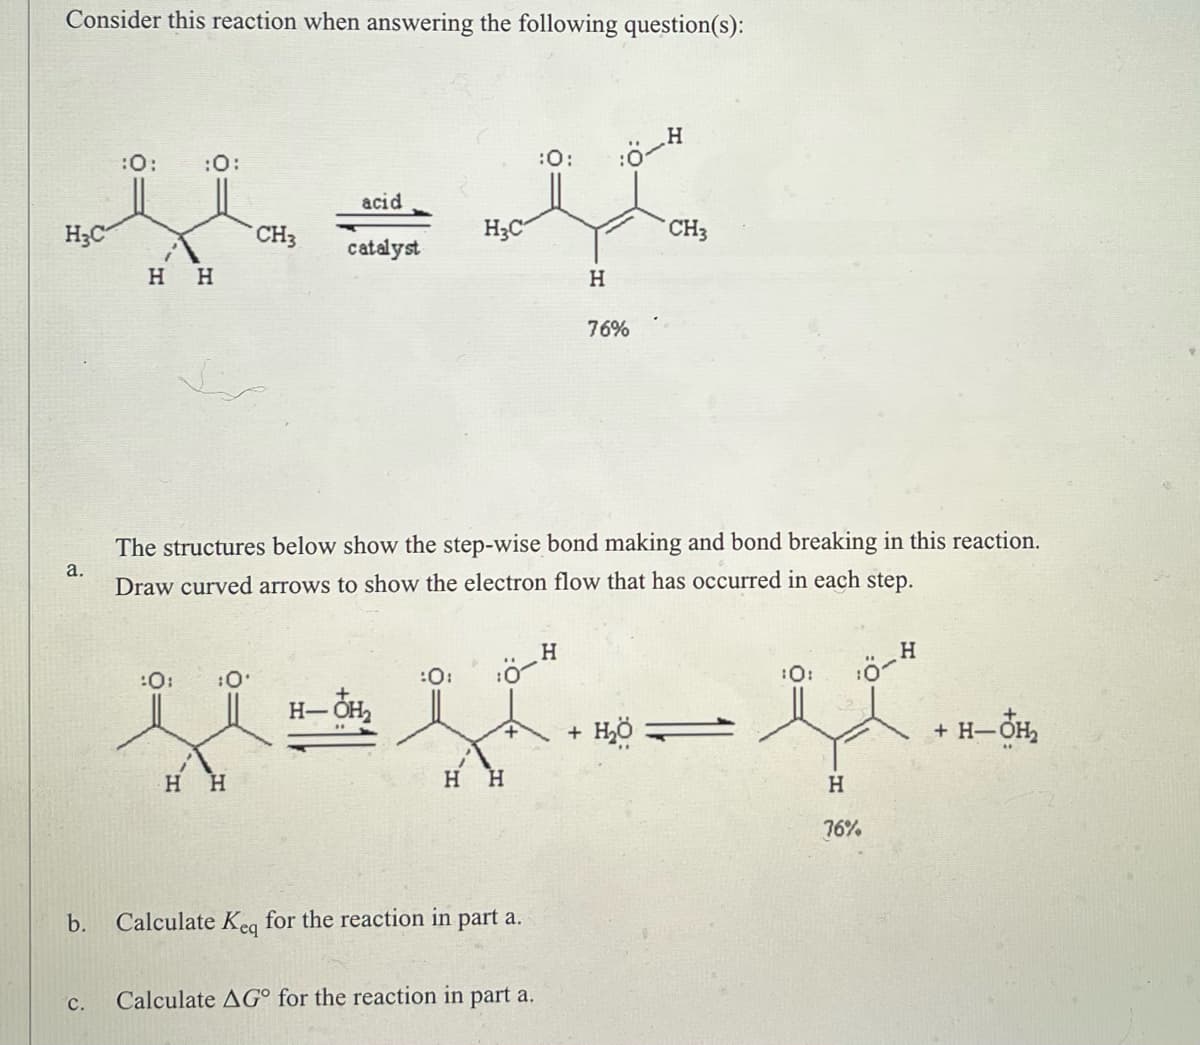 Consider this reaction when answering the following question(s):
H
CH3
ہ سے ان
H3C-
b.
C.
:0:
:0:
H H
CH3
acid
catalyst
H3C-
:0:
+
a.
The structures below show the step-wise bond making and bond breaking in this reaction.
Draw curved arrows to show the electron flow that has occurred in each step.
H
H
:0:
:0:
H- OH
-
- H
Η Η
H H
Calculate Keq for the reaction in part a.
Calculate AG for the reaction in part a.
H
+
76%
ح H2
-ة:
H
76%
+ H